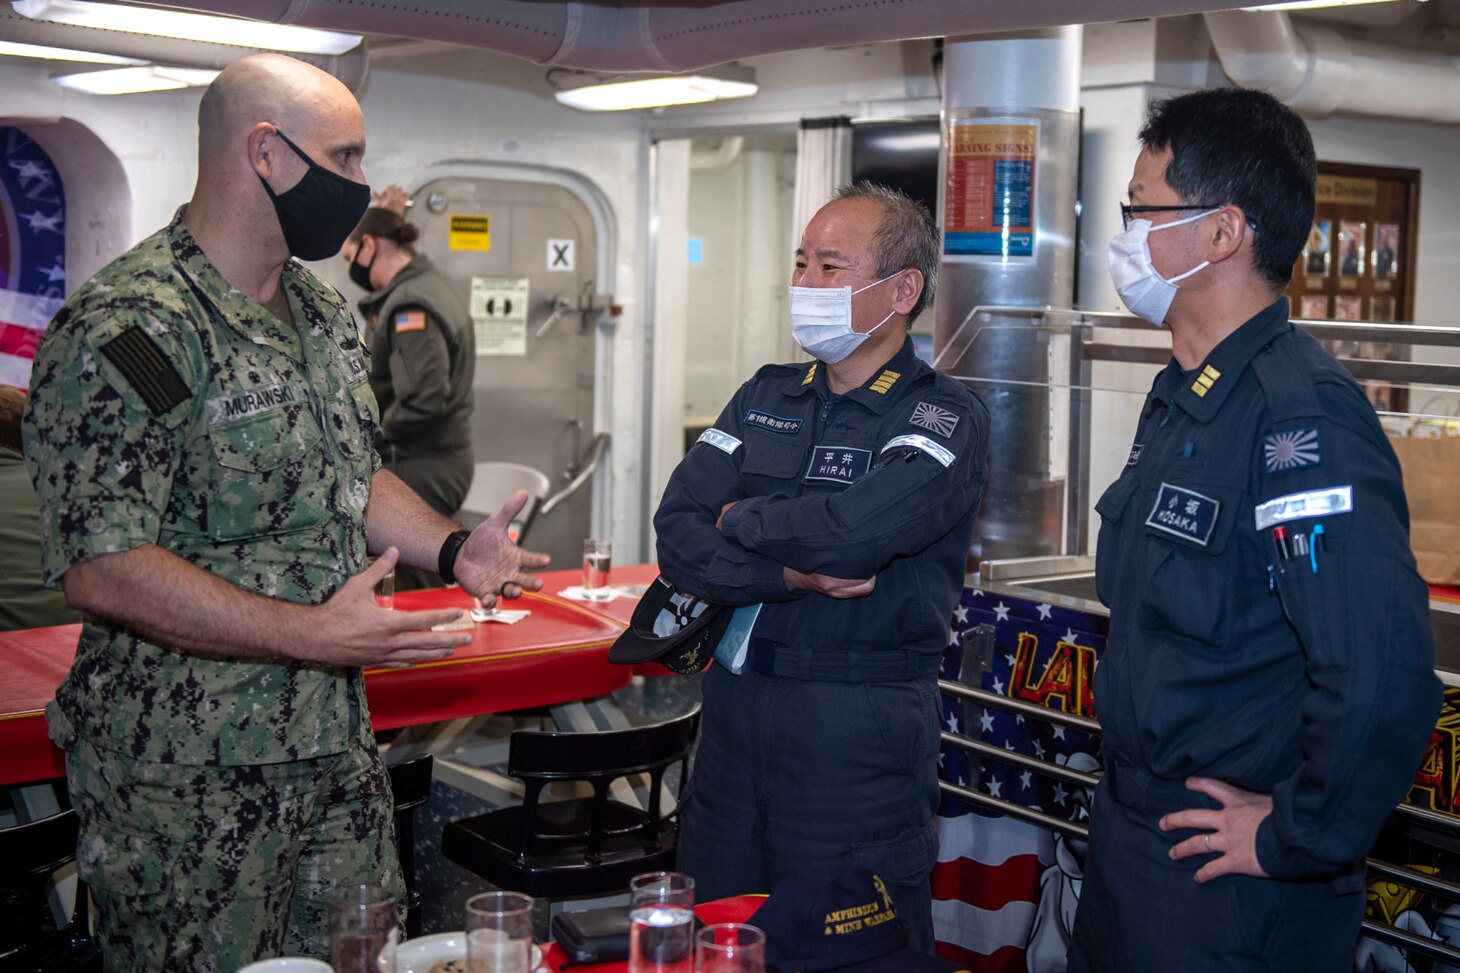 210703-N-HG846-1267 SYDNEY (July 3, 2021) – Cmdr. J.J. Murawski (left), commanding officer of the Arleigh Burke-class guided-missile destroyer USS Rafael Peralta (DDG 115), meets with representatives from the Japan Maritime Self Defense Force to discuss joint maritime operations during Pacific Vanguard 2021. Pacific Vanguard, an exercise involving U.S., Australian, Republic of Korea navies and Japan Maritime Self Defense Force, is designed to strengthen maritime operations in the multilateral environment. (U.S. Navy photo by Mass Communication Specialist 3rd Class Daniel Serianni)